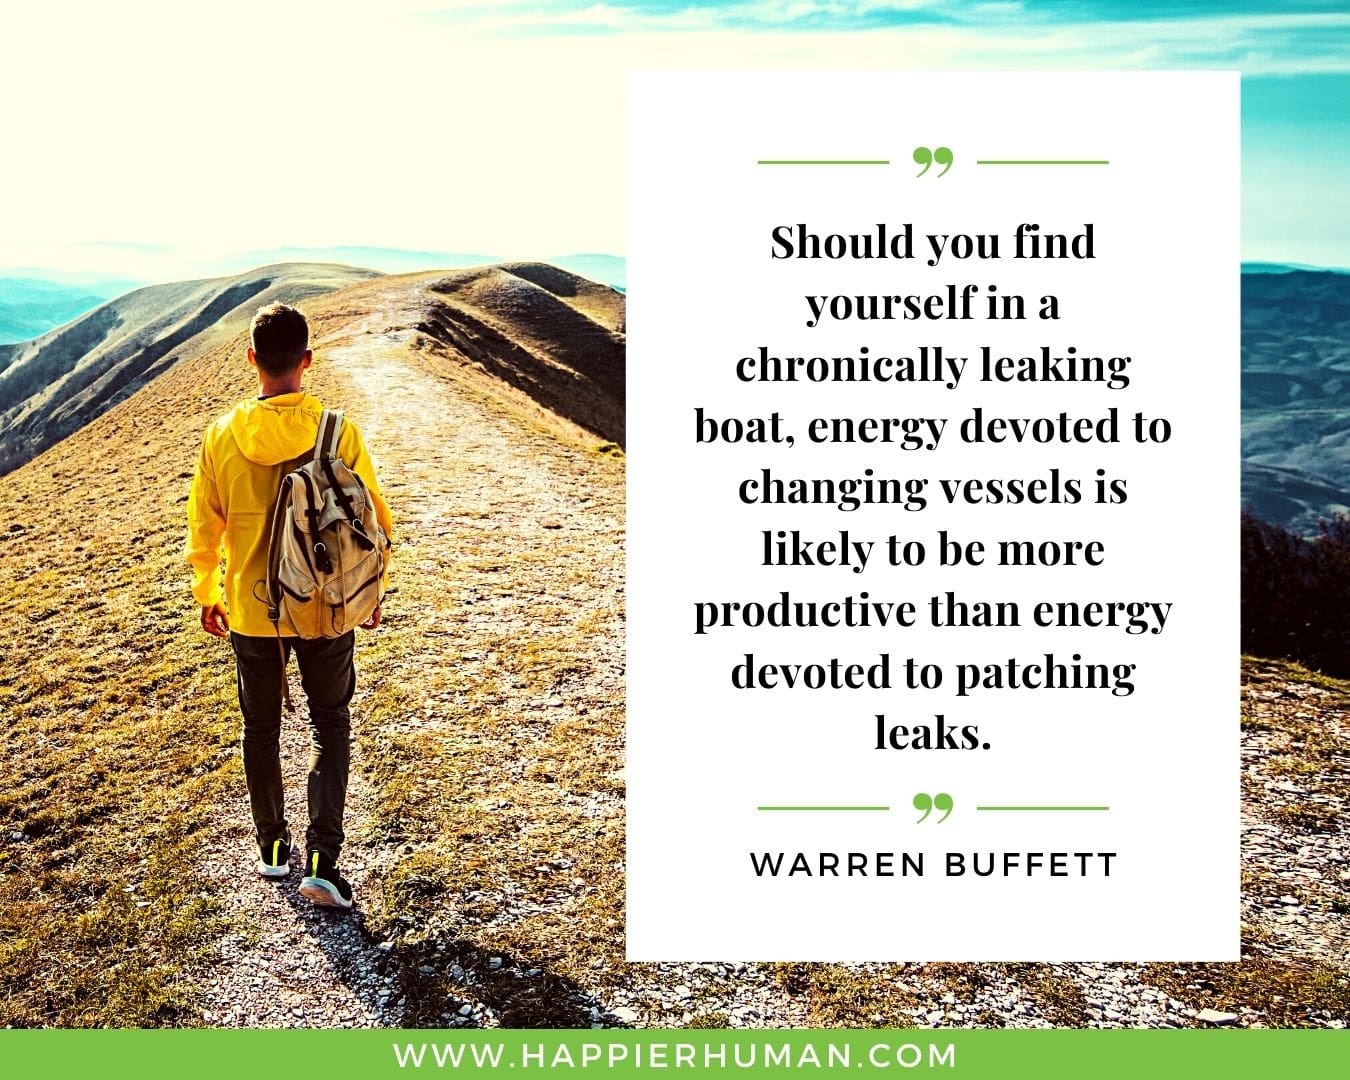 Positive Energy Quotes - “Should you find yourself in a chronically leaking boat, energy devoted to changing vessels is likely to be more productive than energy devoted to patching leaks.” - Warren Buffett